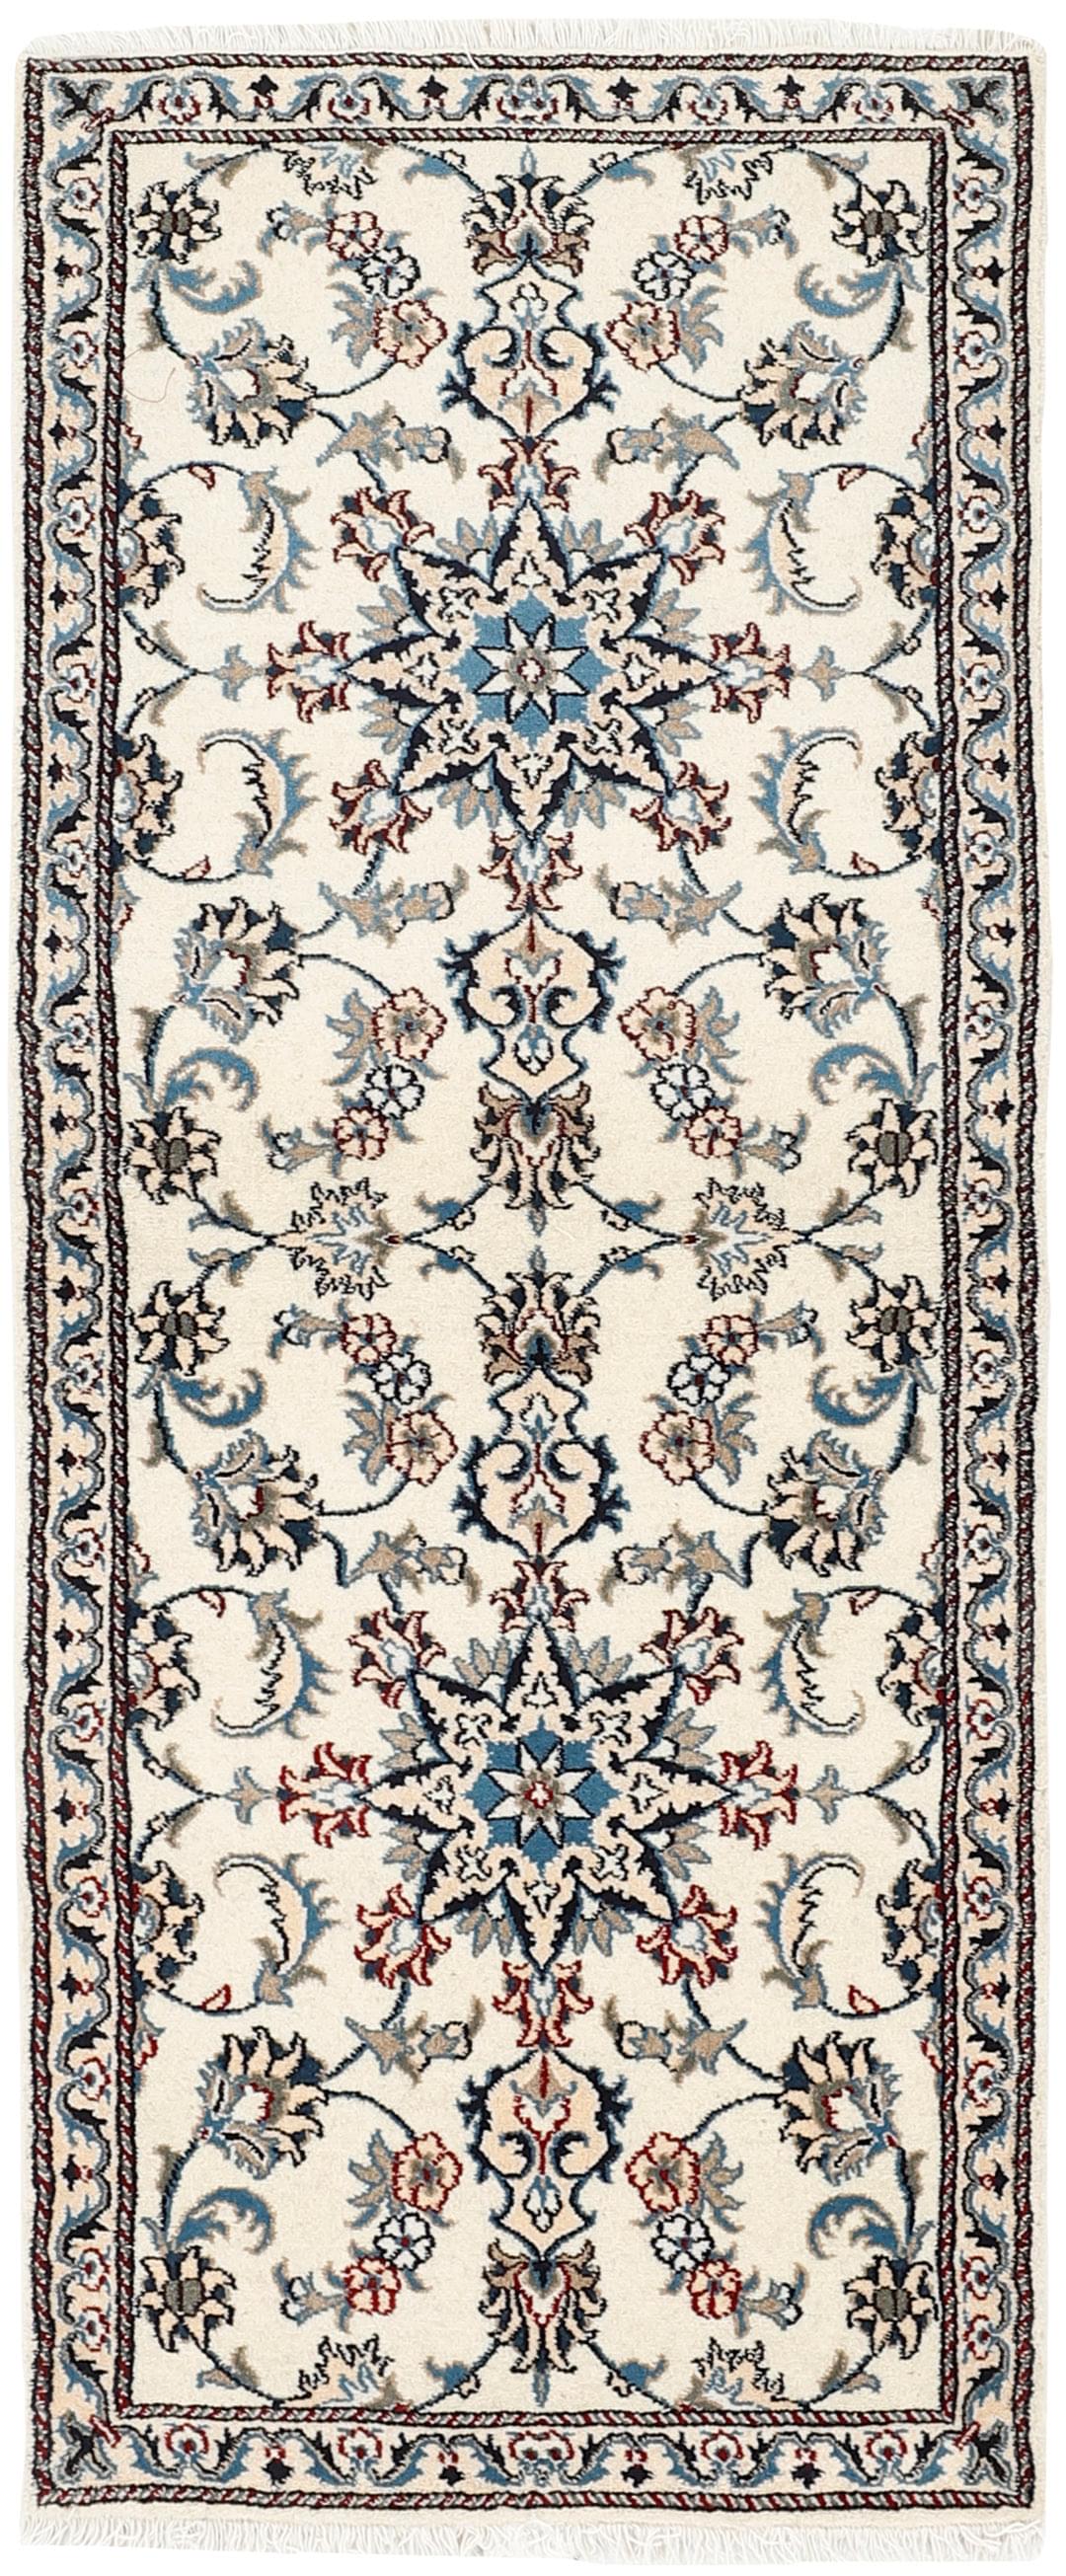 authentic persian runner with navy and cream floral design